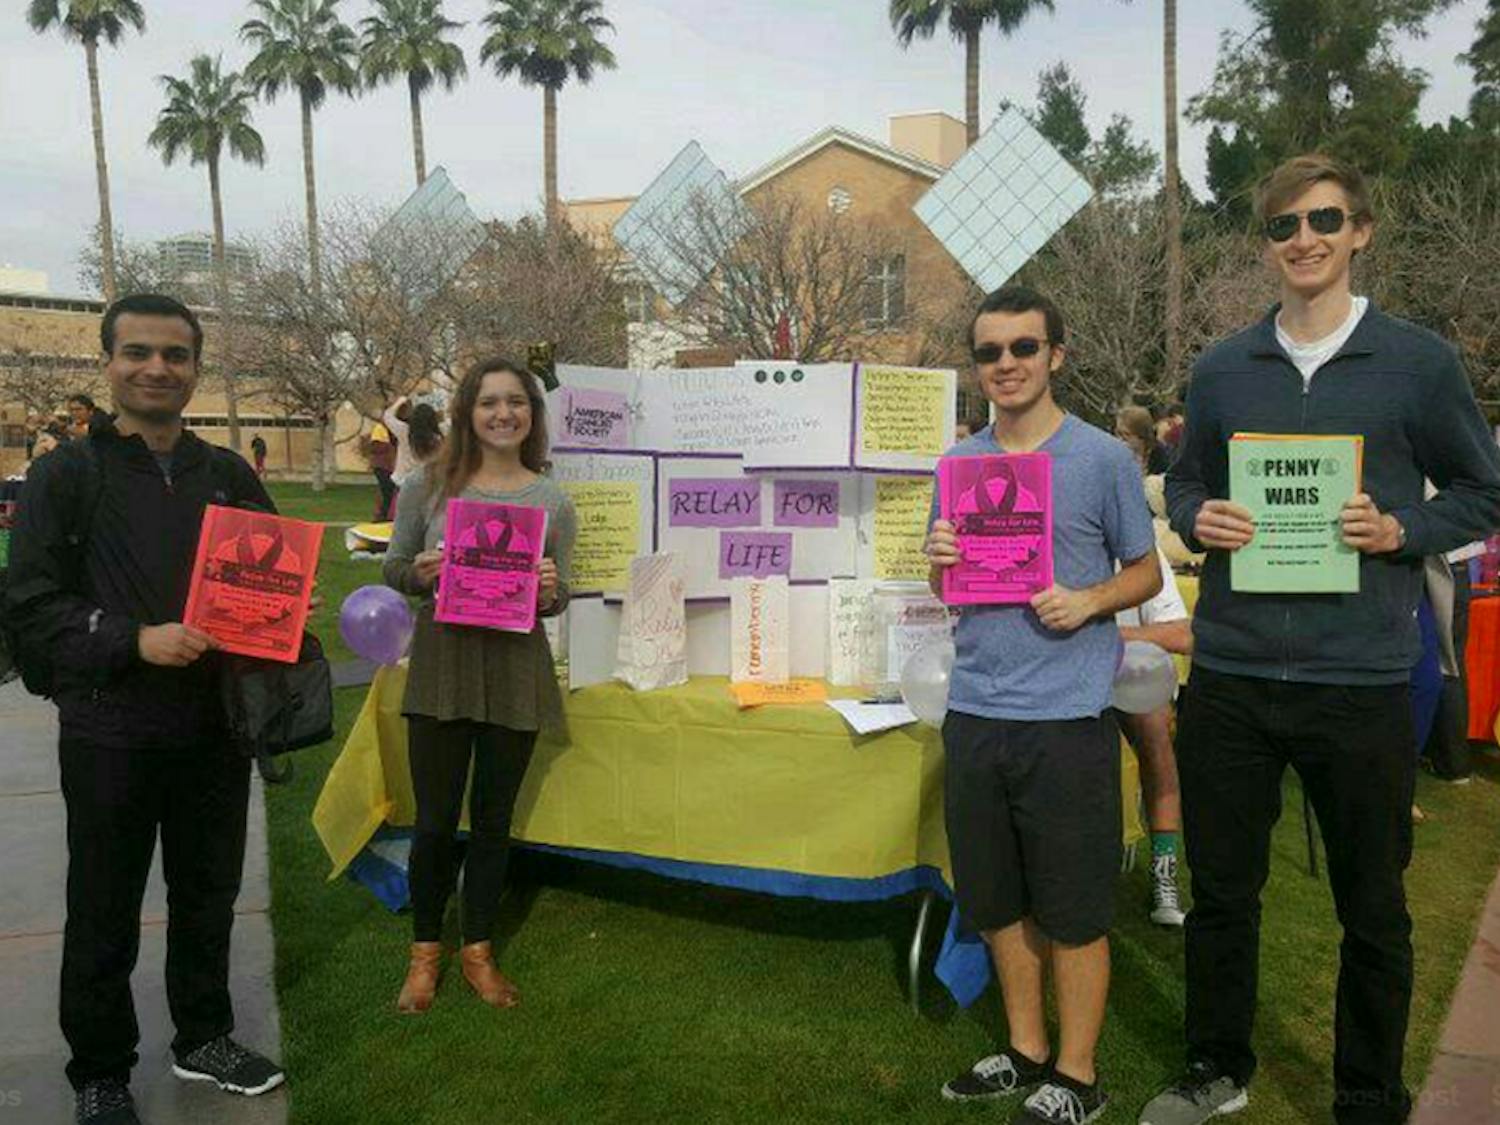 Students pose for a photo at a tabling event for Relay for Life on Hayden lawn at ASU's Tempe campus in 2017.